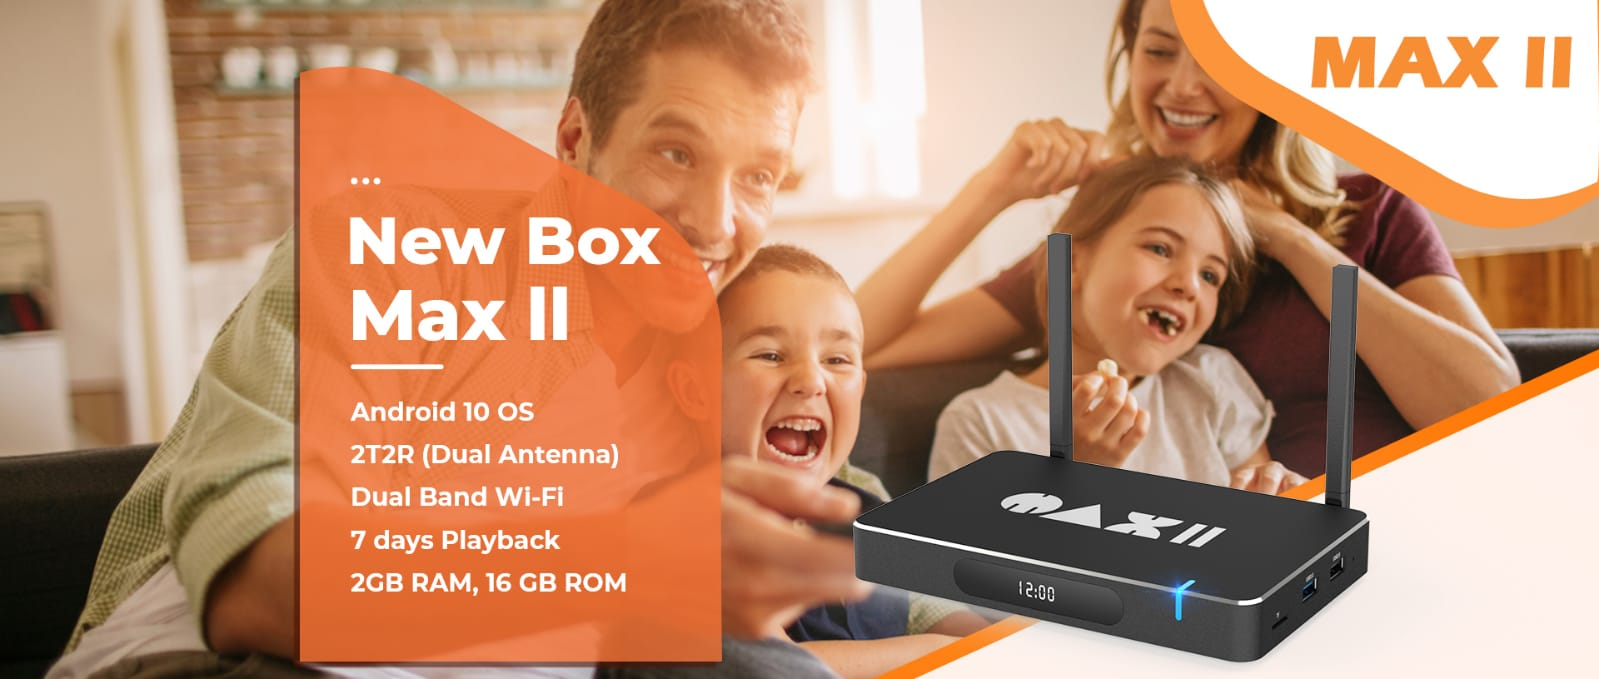 Octastream Superbox pprovider provides the simplest way to watch entertainment on your TV. USA IPTV Box allows you to access more than 2000+ Live Premium Channels, 10000+ Films,50+ Playback channels.